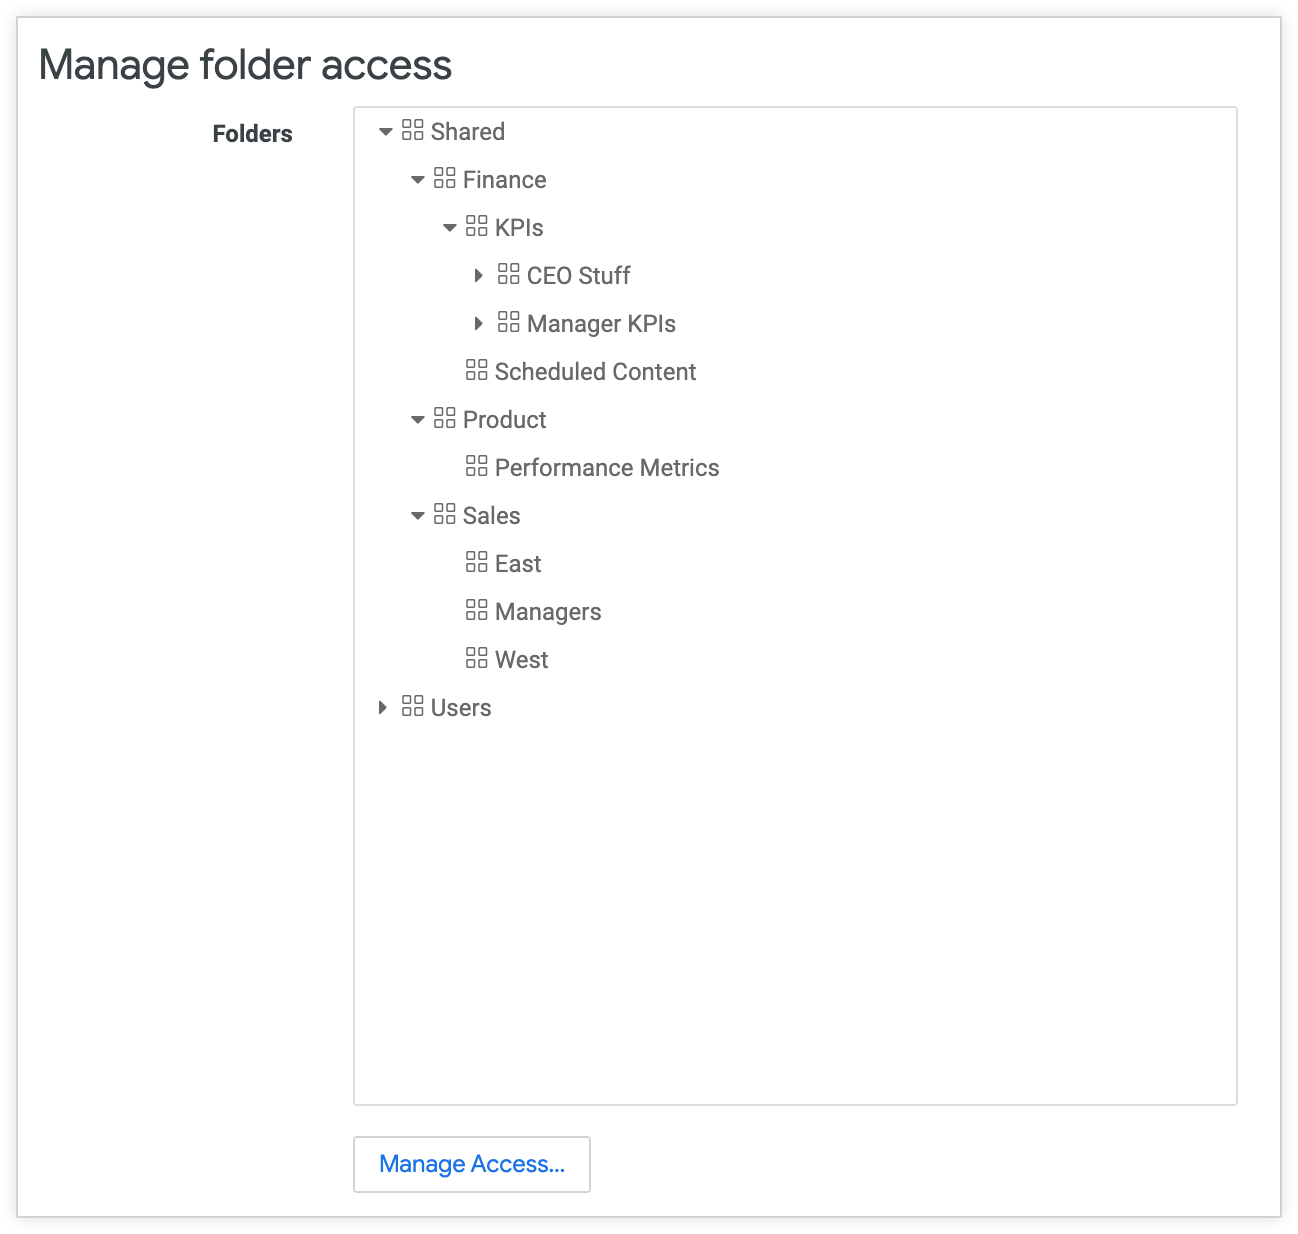 The Shared folder contains Finance, Product, and Sales folders, which contain folders for their departments' use.